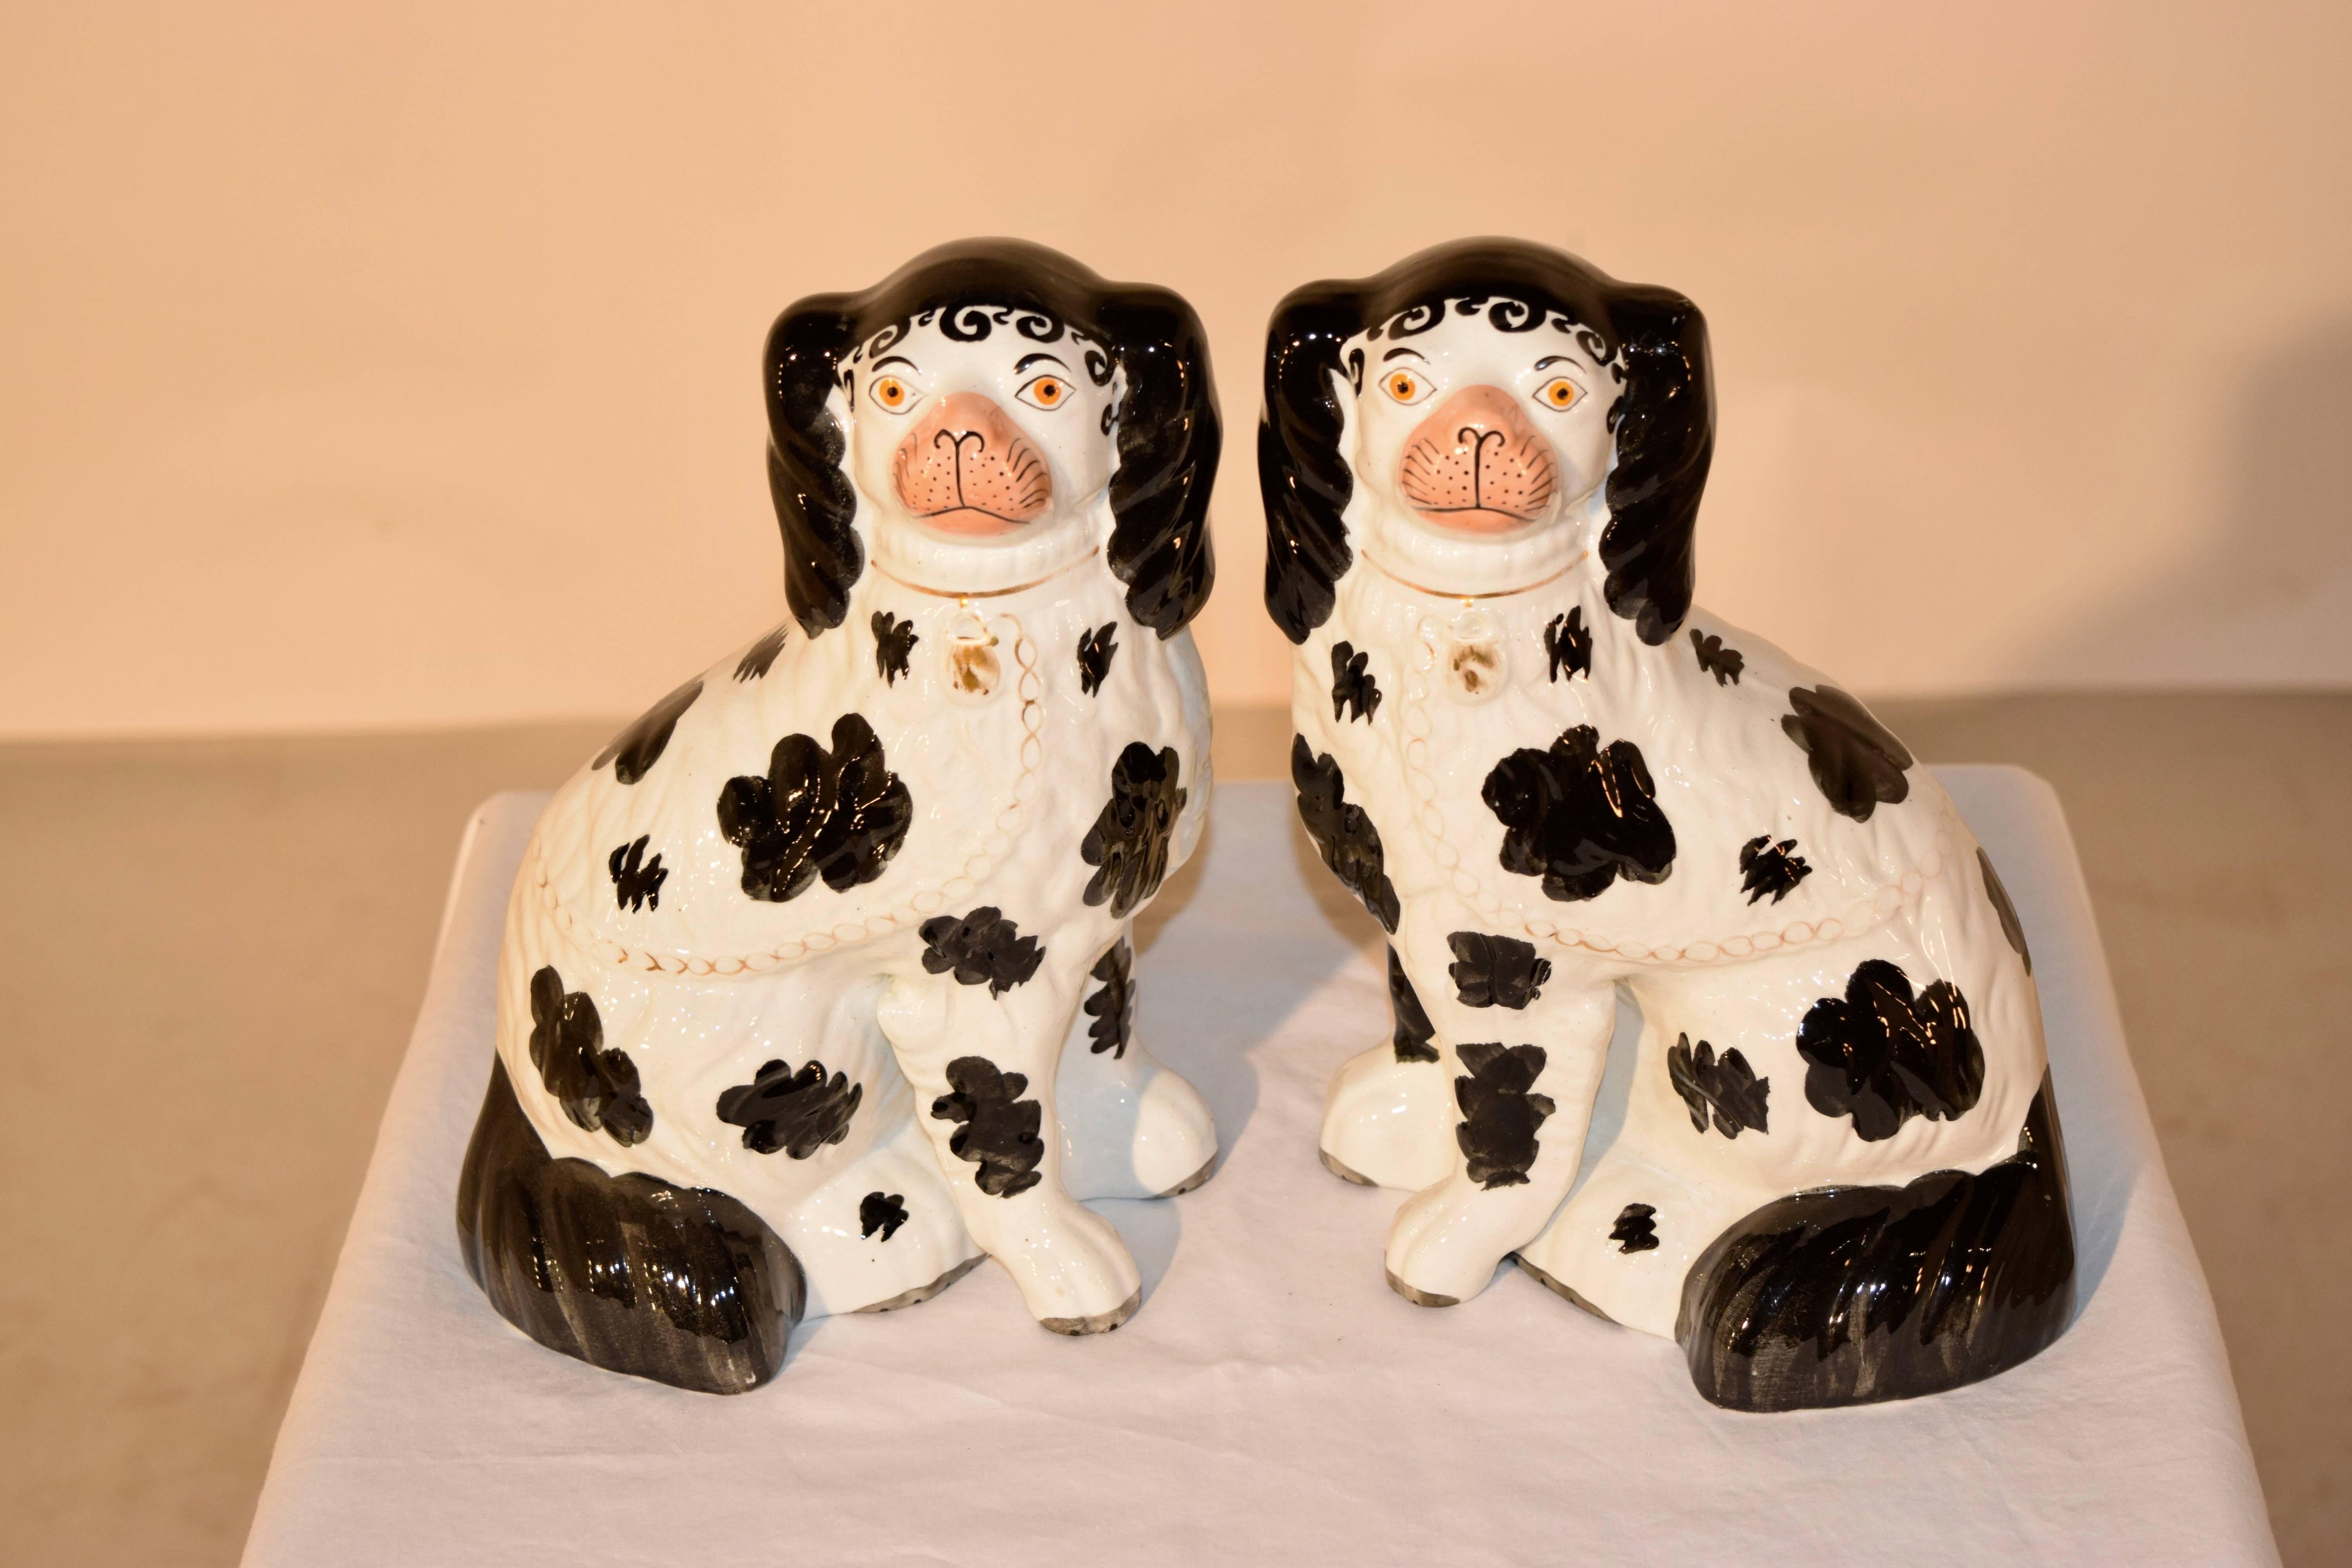 19th Century pair of Staffordshire spaniels in the Disraeli style. The spaniels have separated front legs, and are painted in a black and white design. The design is named after Benjamin Disraeli, who was the Prime Minister to England twice during